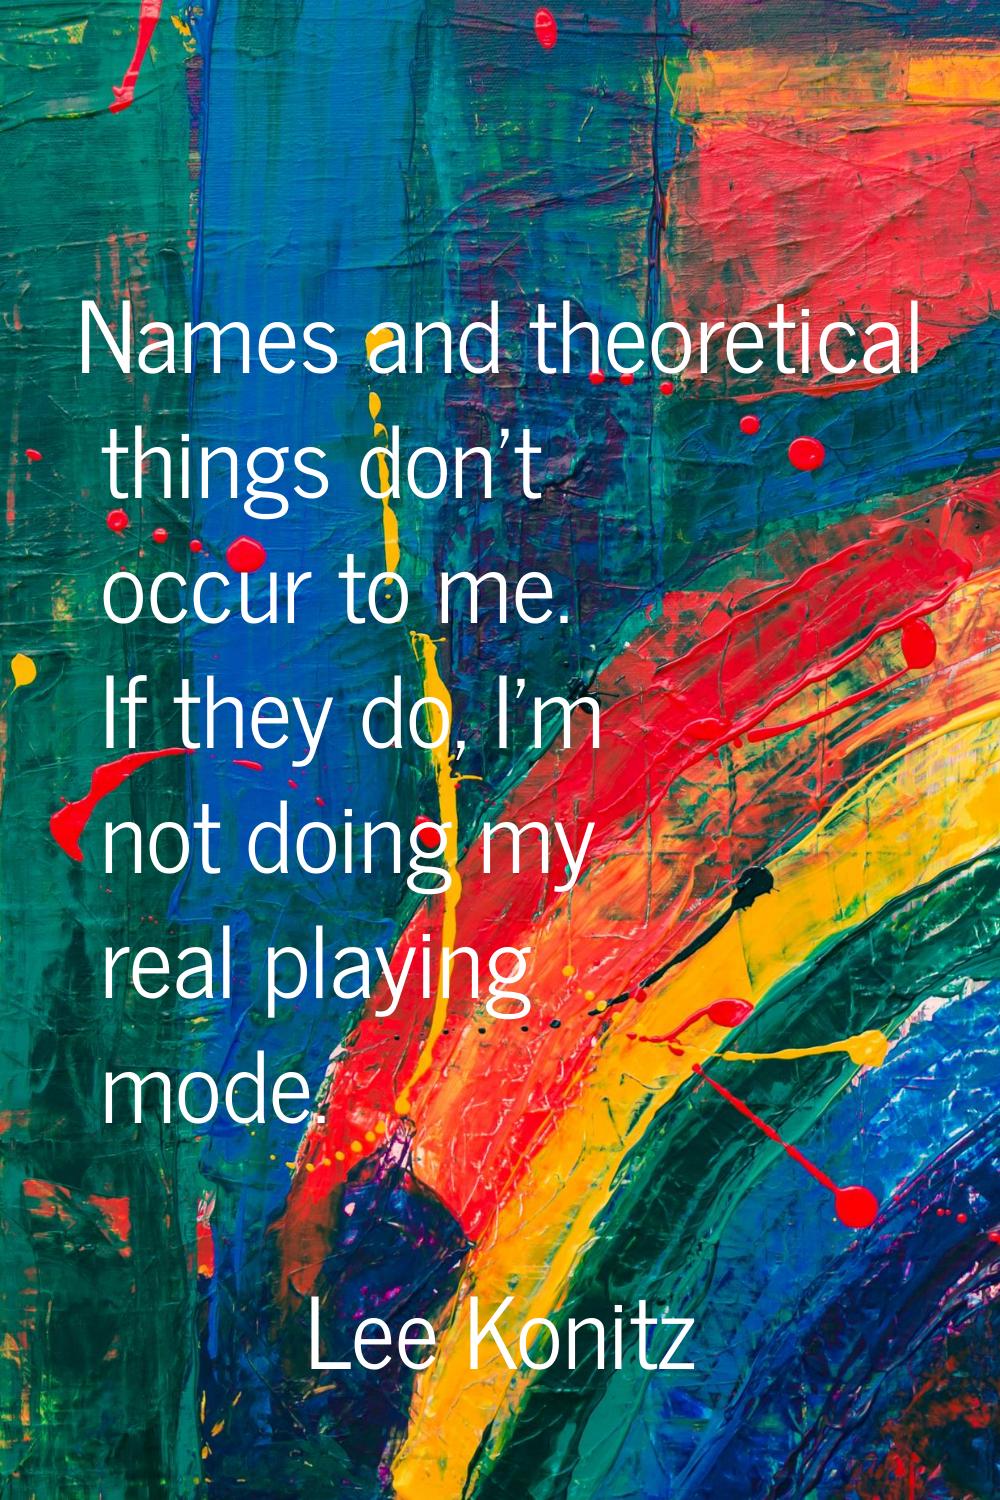 Names and theoretical things don't occur to me. If they do, I'm not doing my real playing mode.